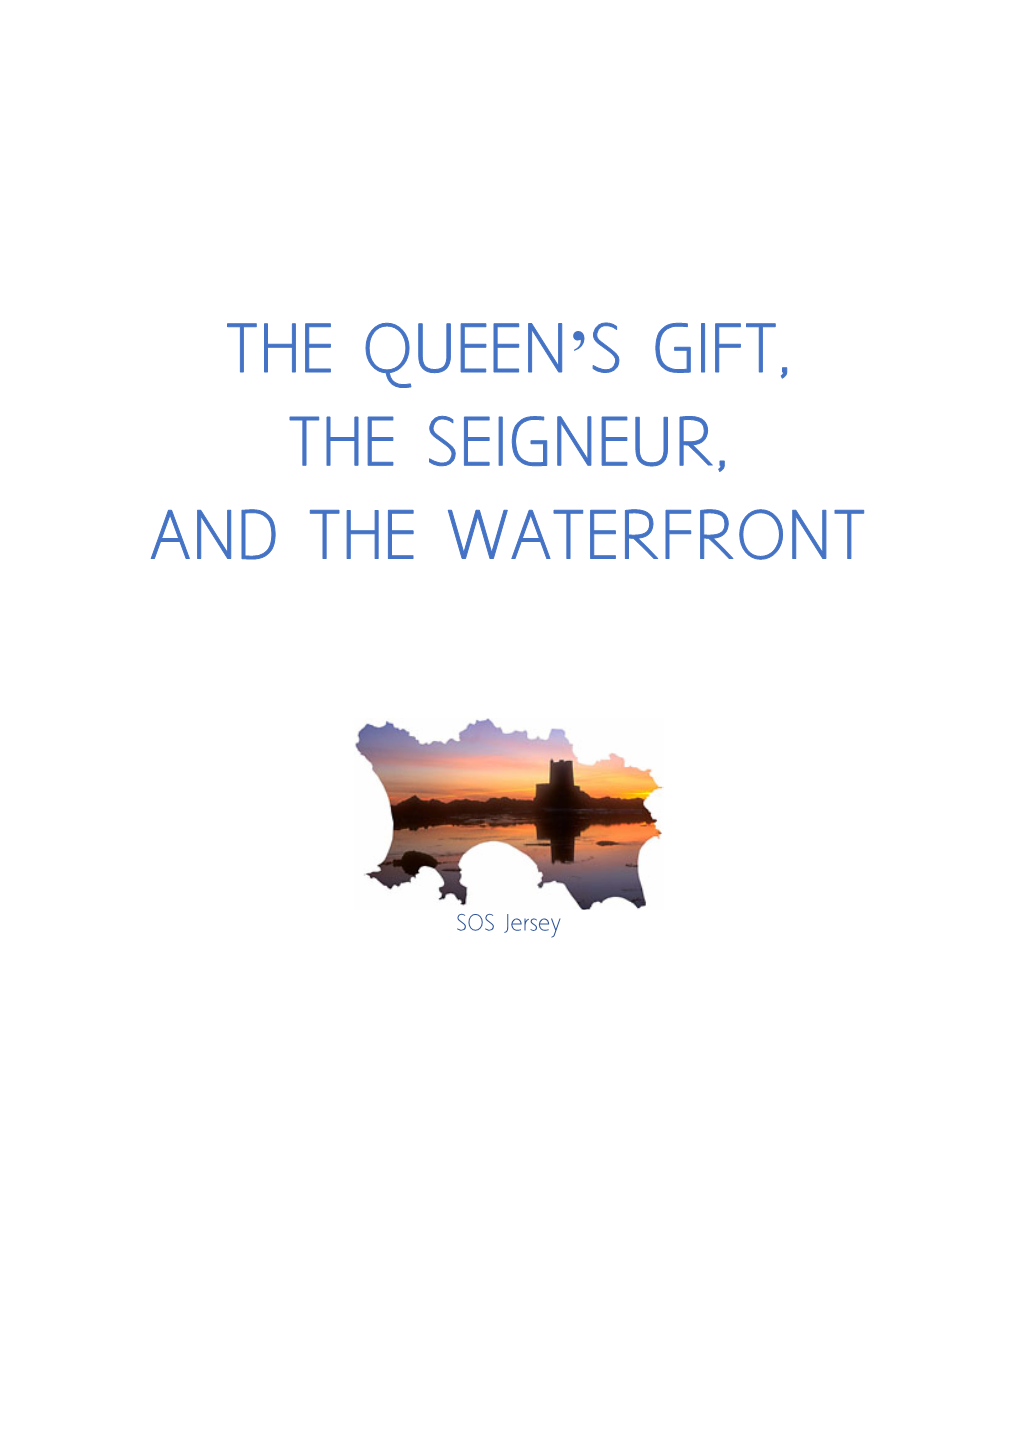 The Queen's Gift, the Seigneur, and The